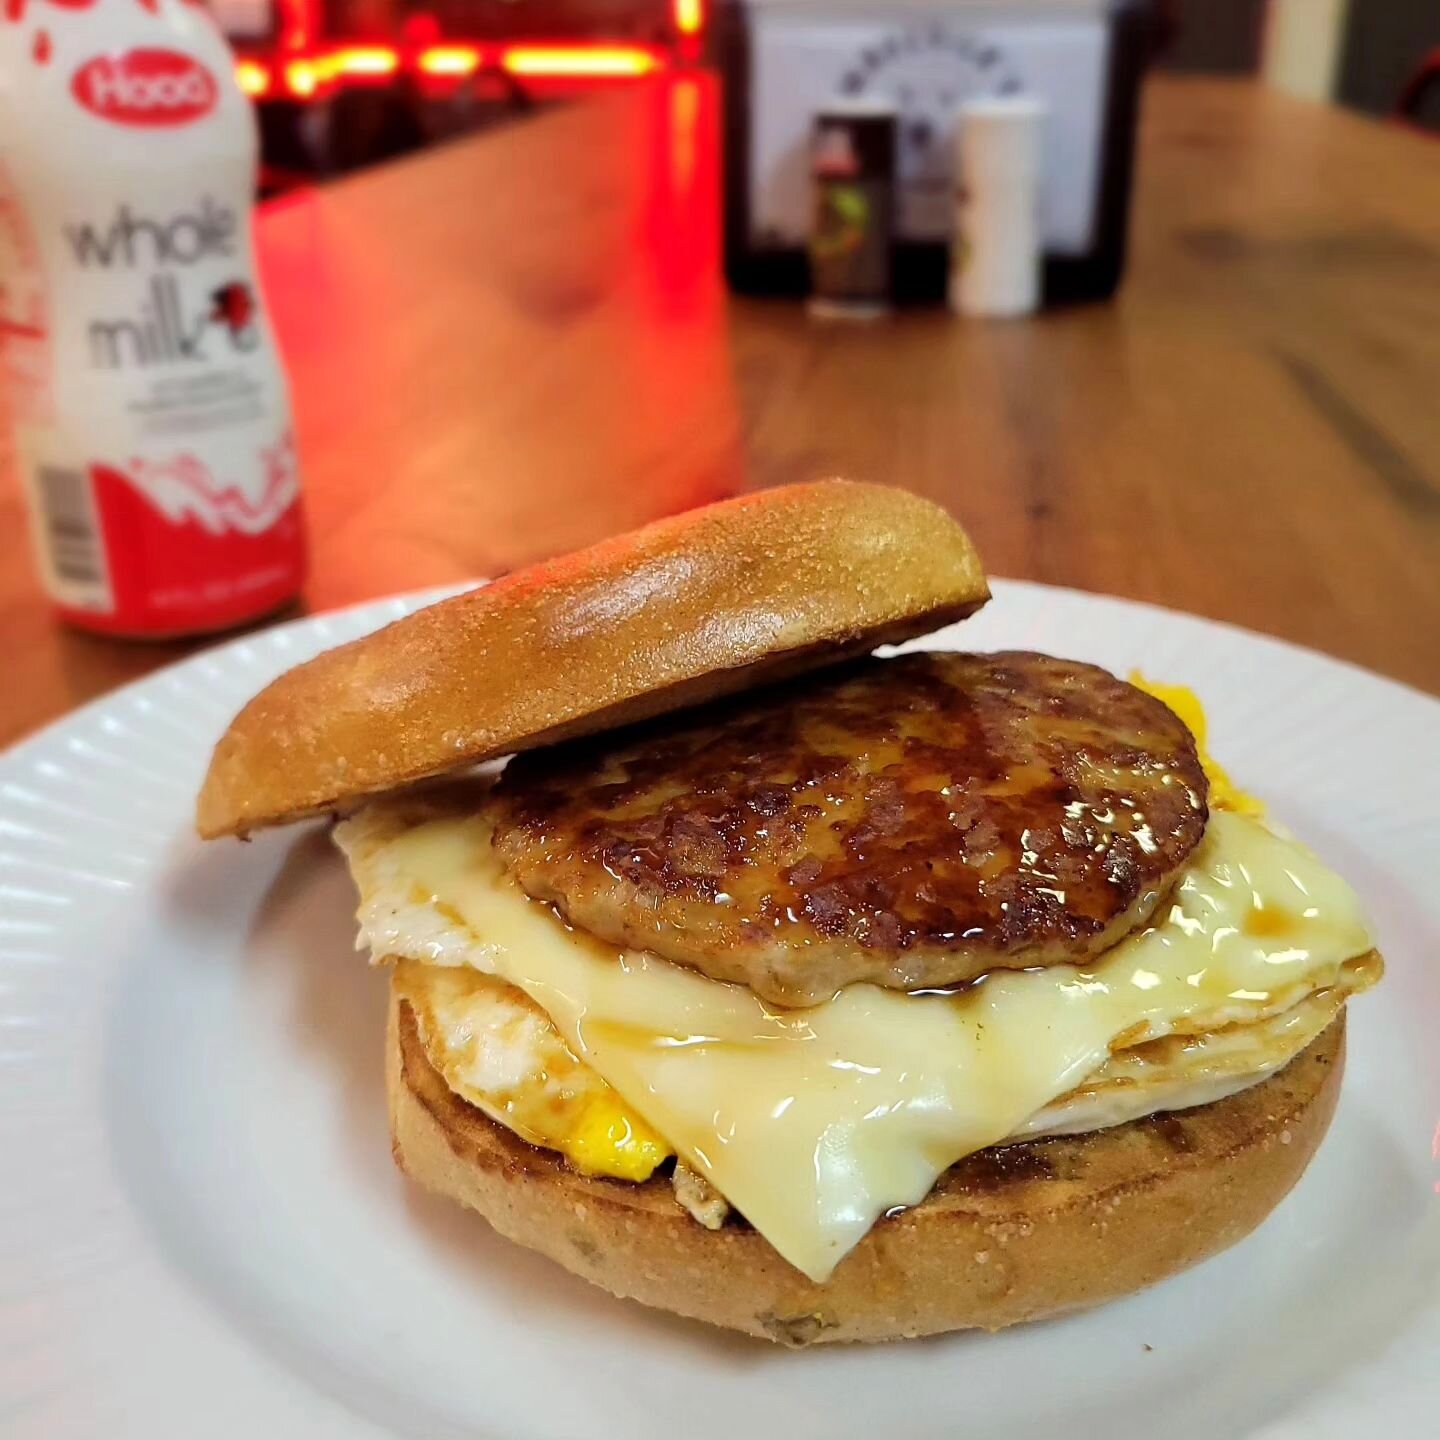 Bagel Sammie Sunday!

📸 Sausage, Egg, Vermont Sharp Cheddar with Real Maple Syrup on a Toasted Plain Bagel

Specials for Sunday, May 21st

Breakfast: Sausage, Egg, Vermont Sharp Cheddar with Real Maple Syrup on a Tpasted Plain Bagel $6.99

House Roa